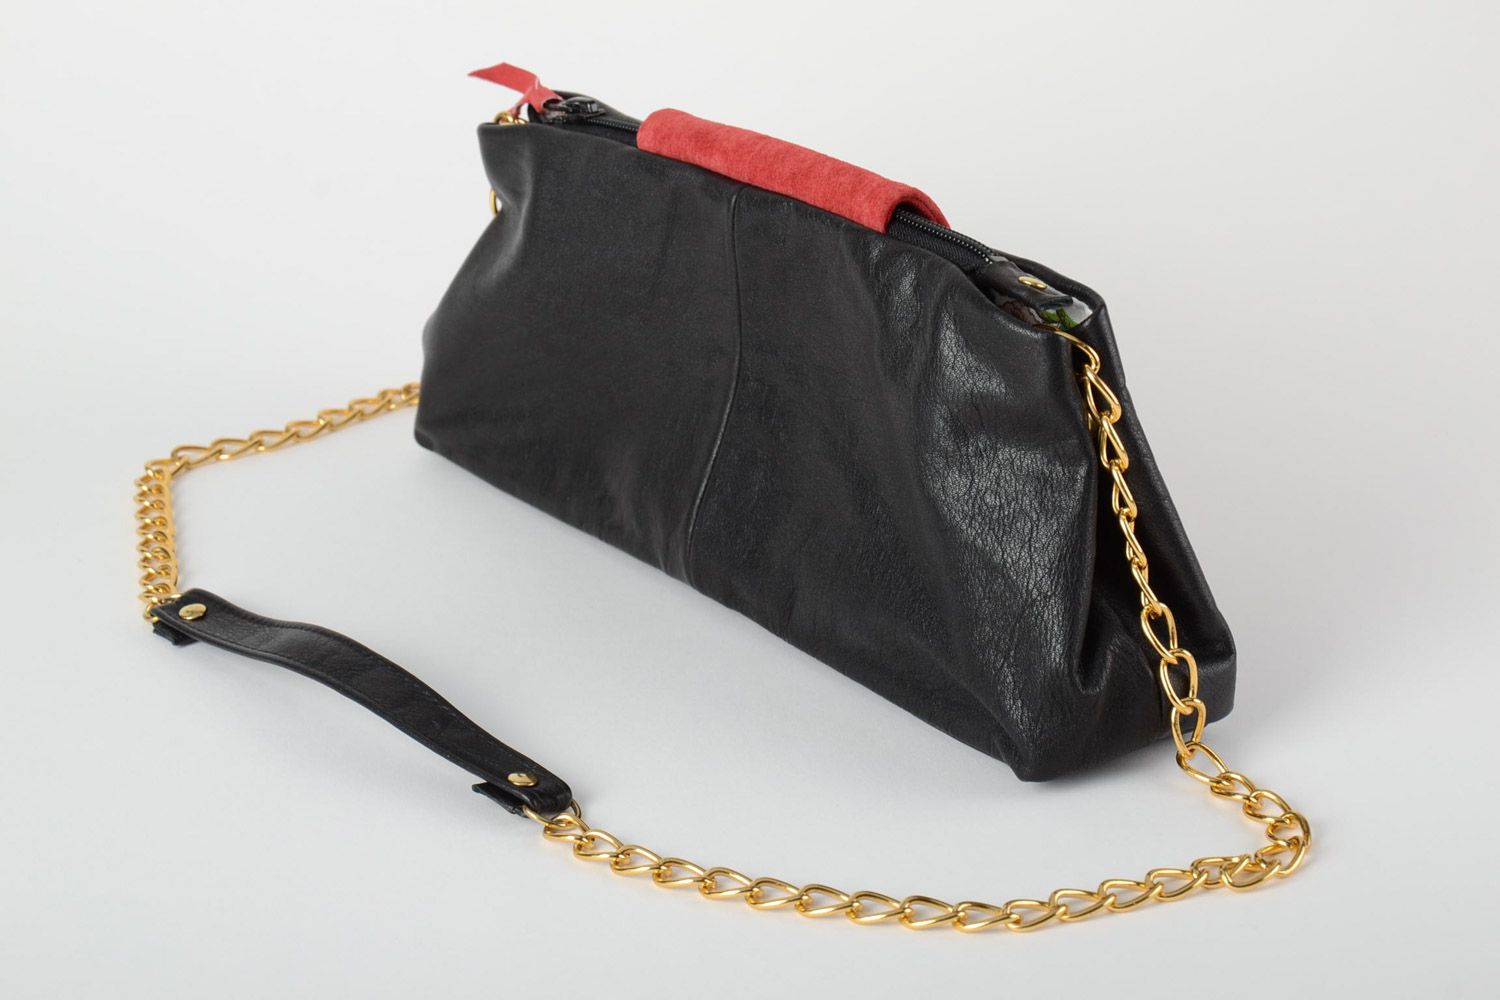 Handmade women's clutch bag sewn of black genuine leather with red inserts on chain photo 4